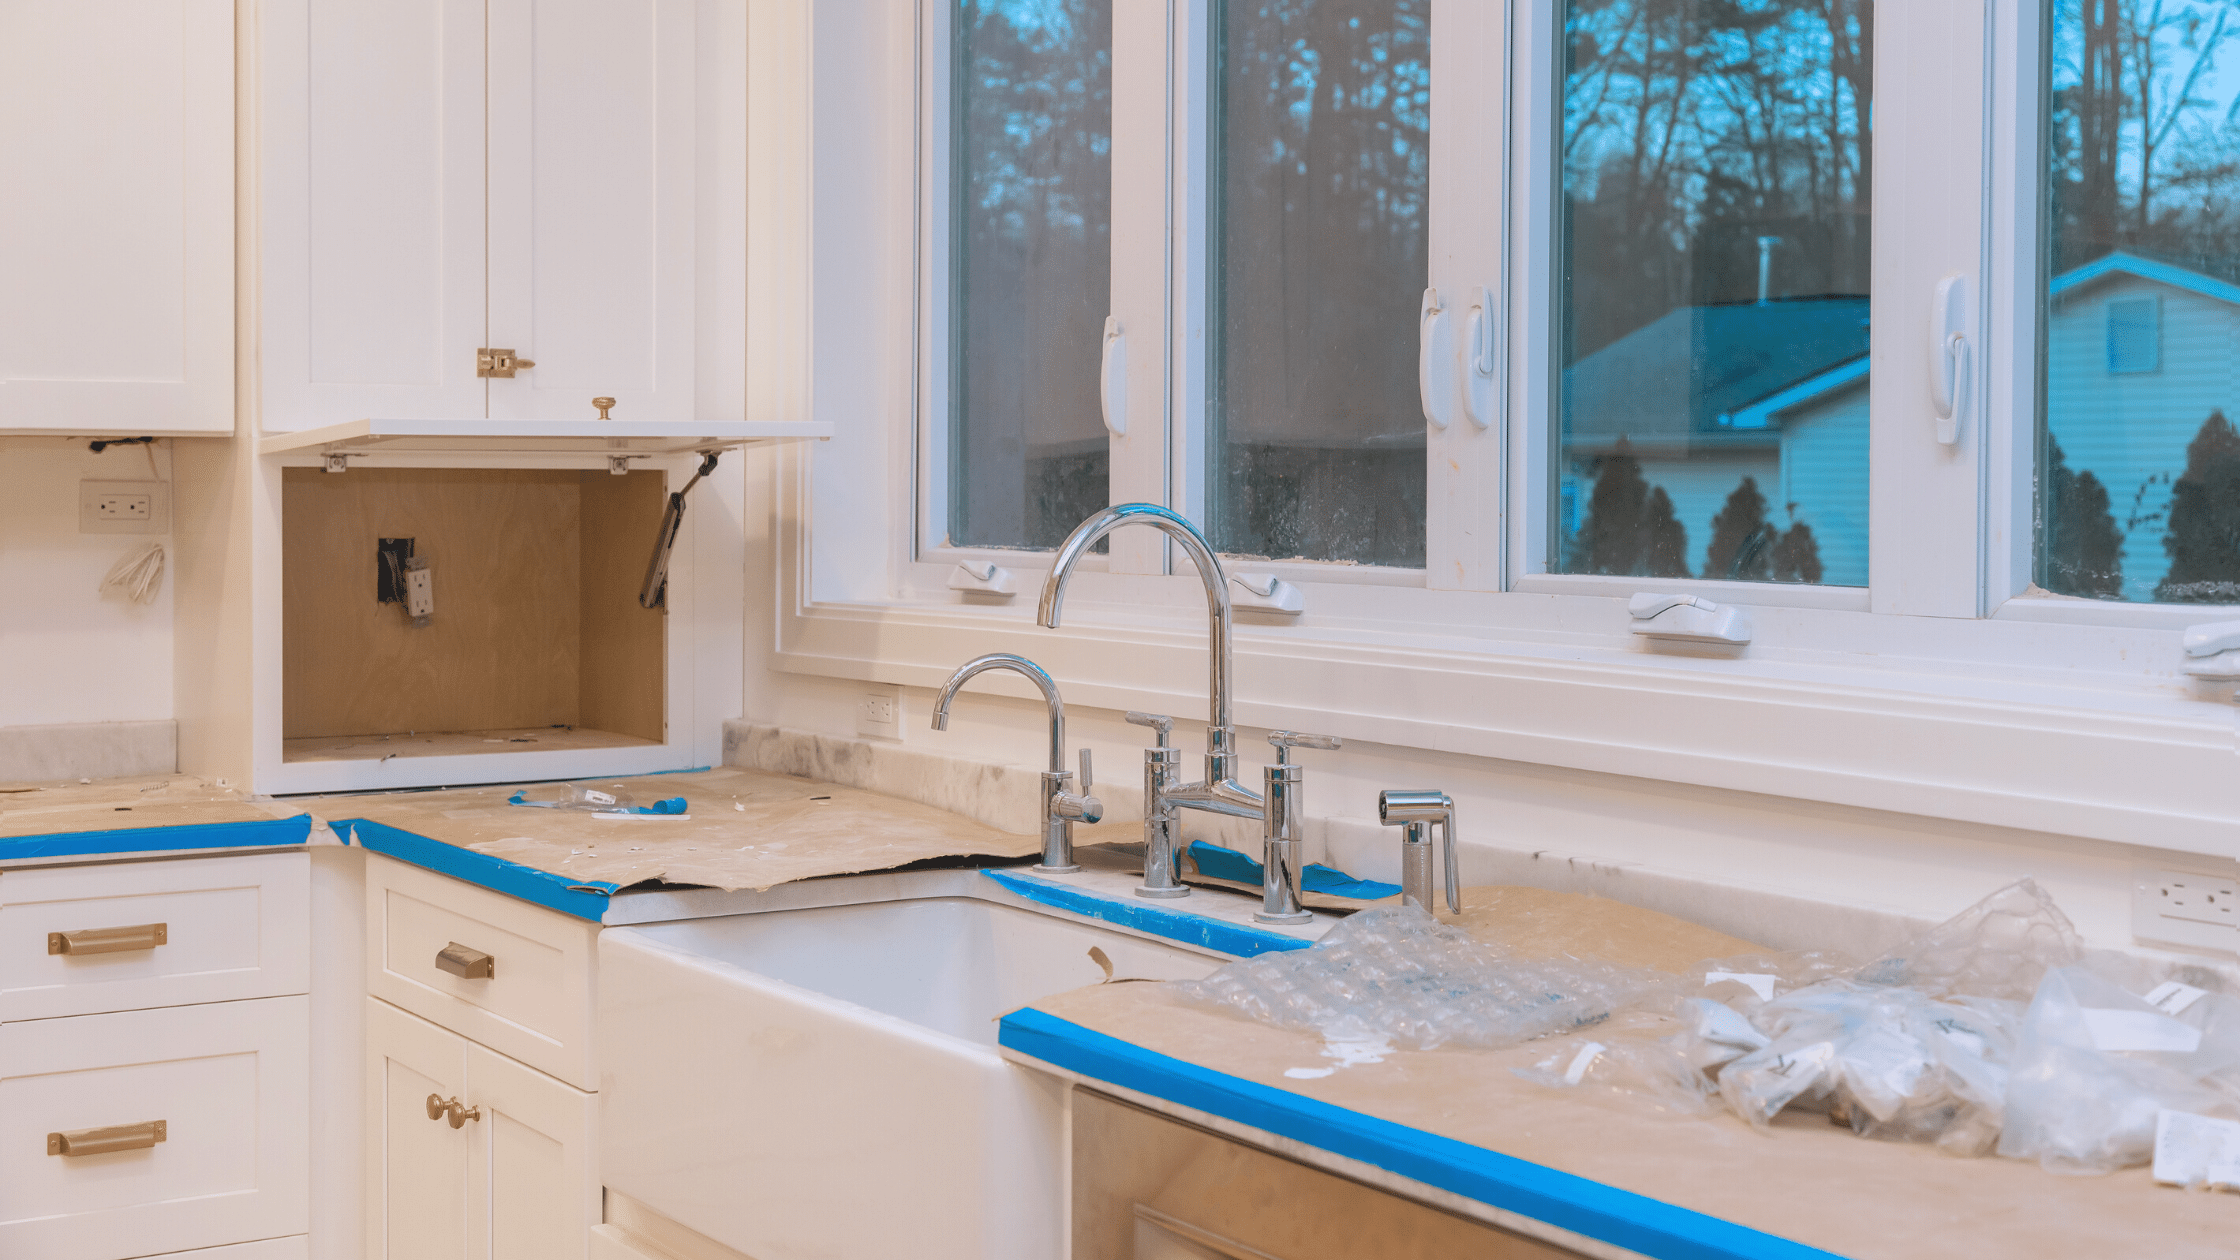 2023 Home Remodeling Dilemma: DIY or Hire a Pro? [Expert Insights]